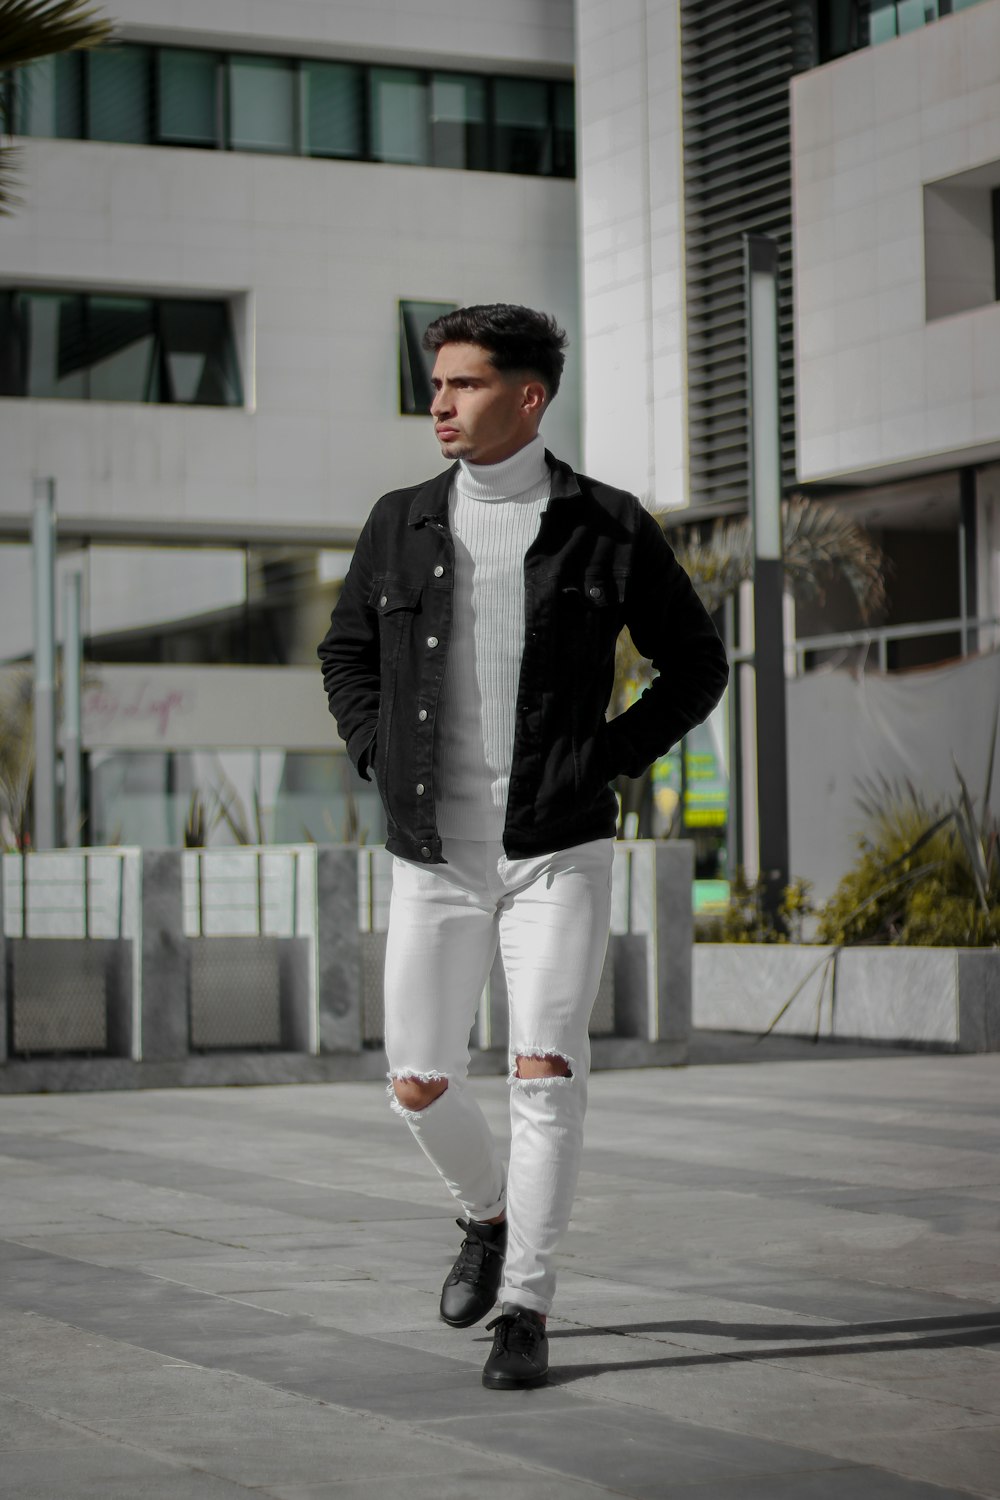 man in black leather jacket and white pants standing on gray concrete floor  during daytime photo – Free Maroc Image on Unsplash